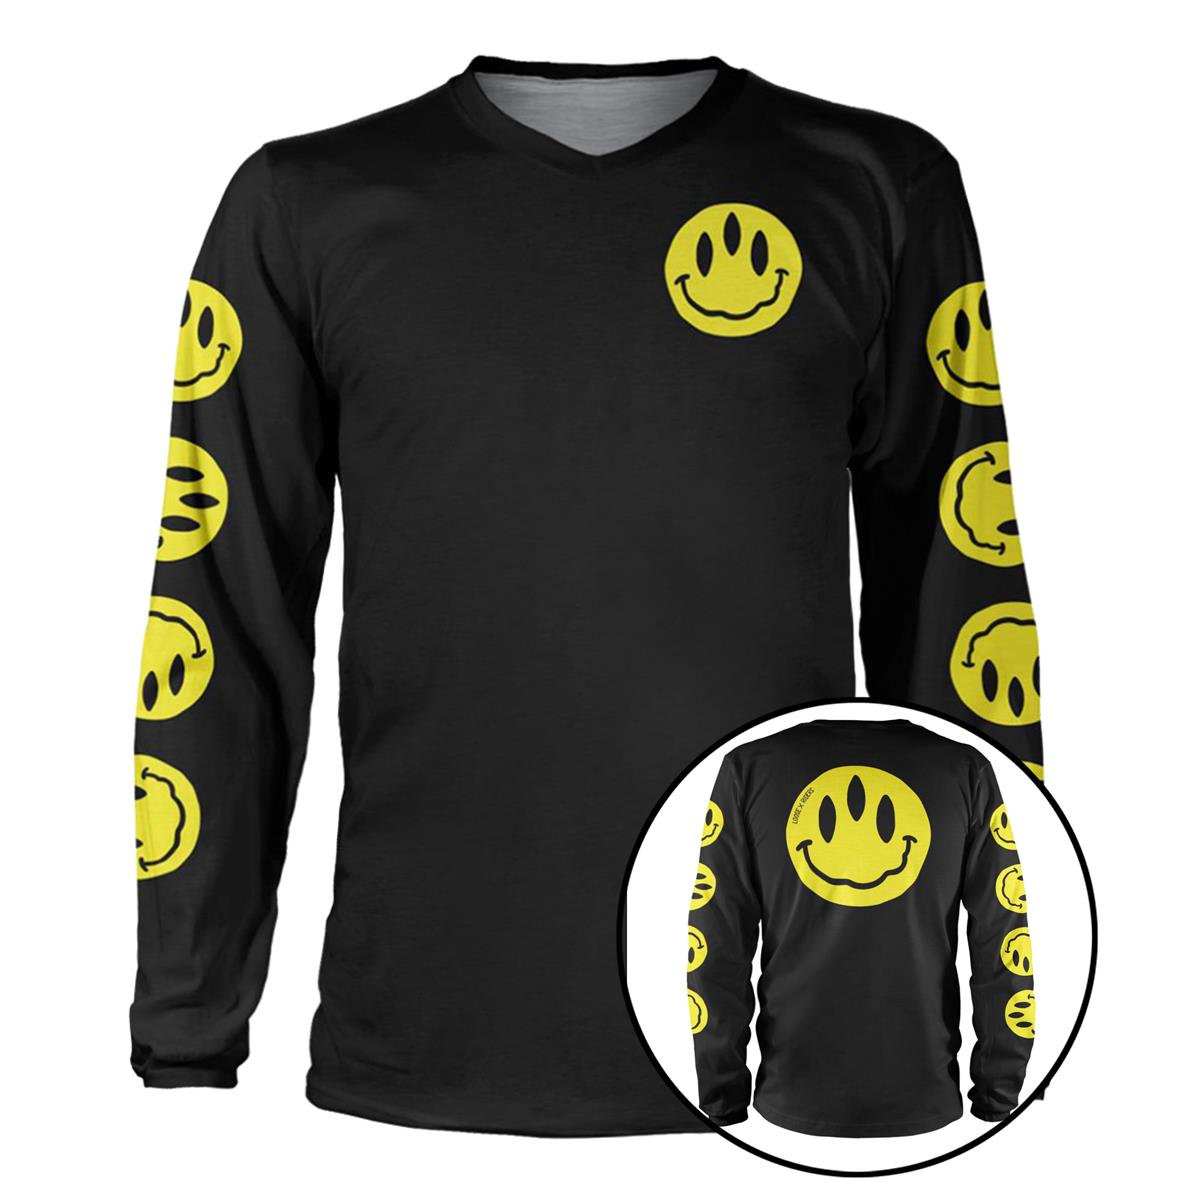 Loose Riders Maglia MTB Manica Lunga Cult of Shred Stoked! - Black/Yellow